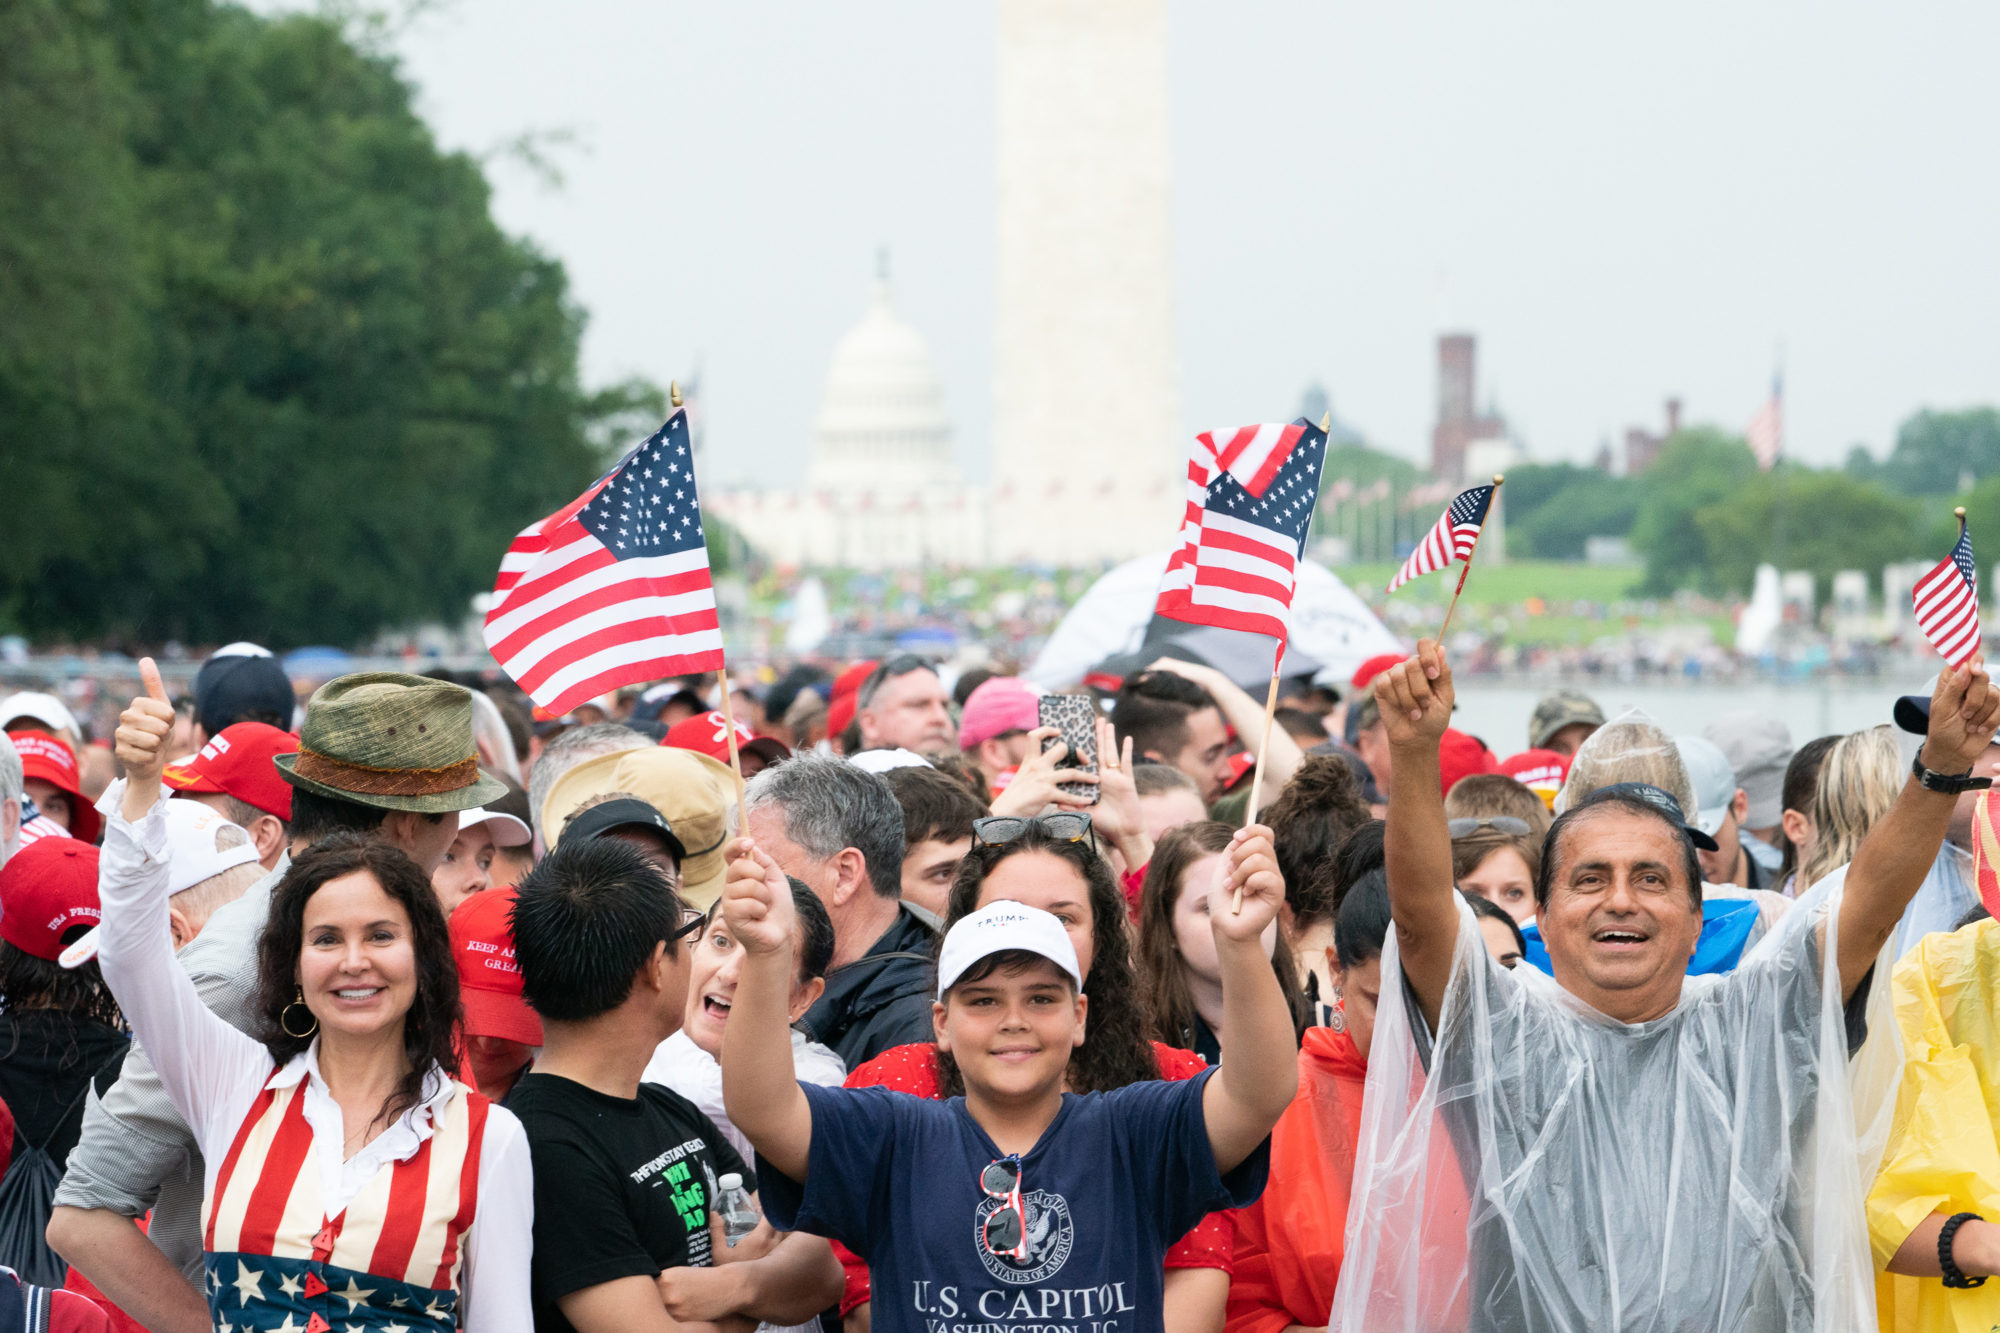 Salute to America 2019 - The Opposition to Nationalism that Wasn’t